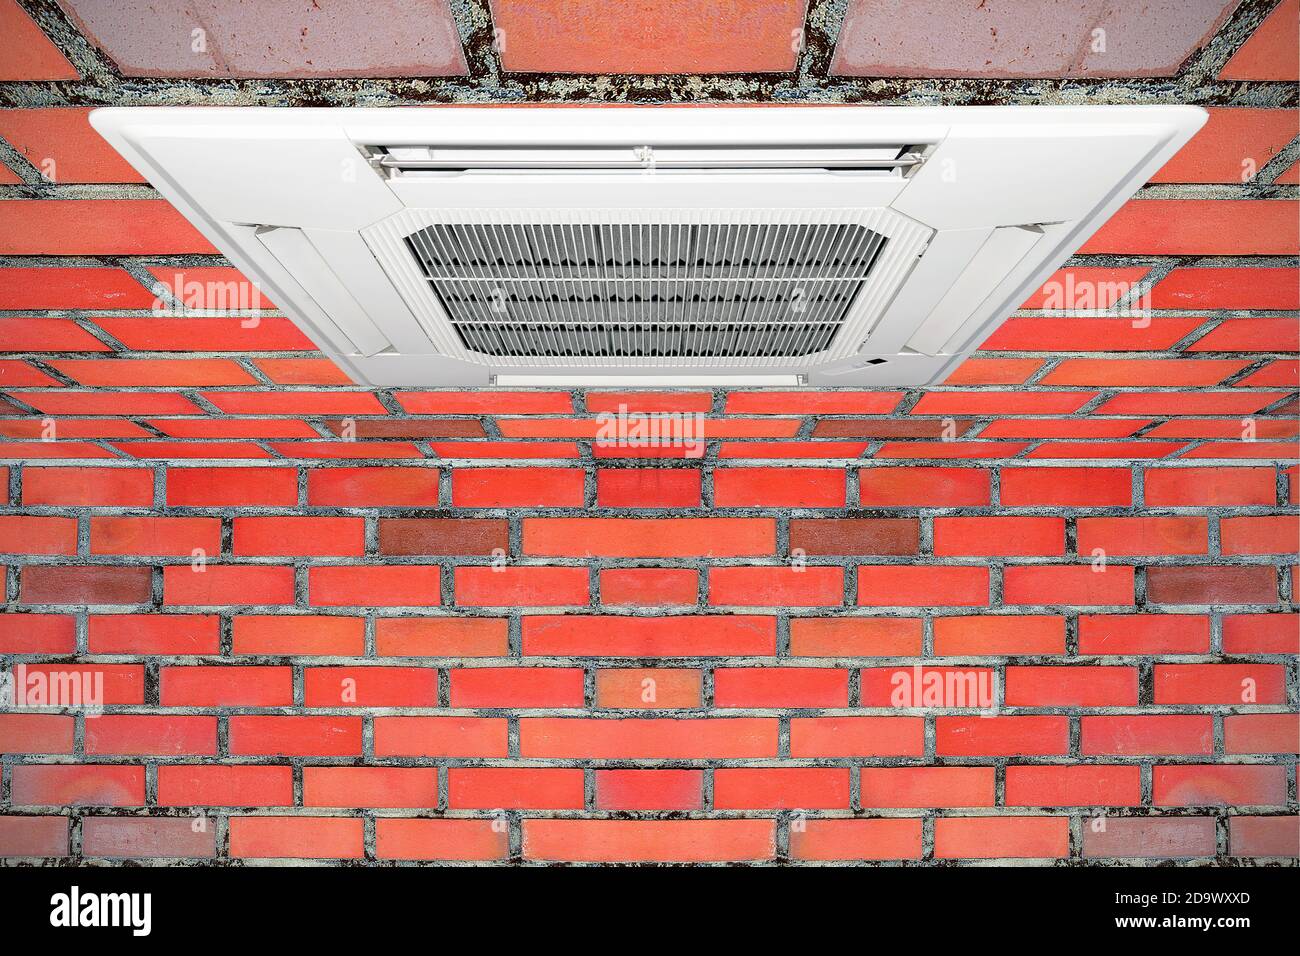 Built-in air conditioner for home and office embedded on the ceiling made of red brick. Stock Photo